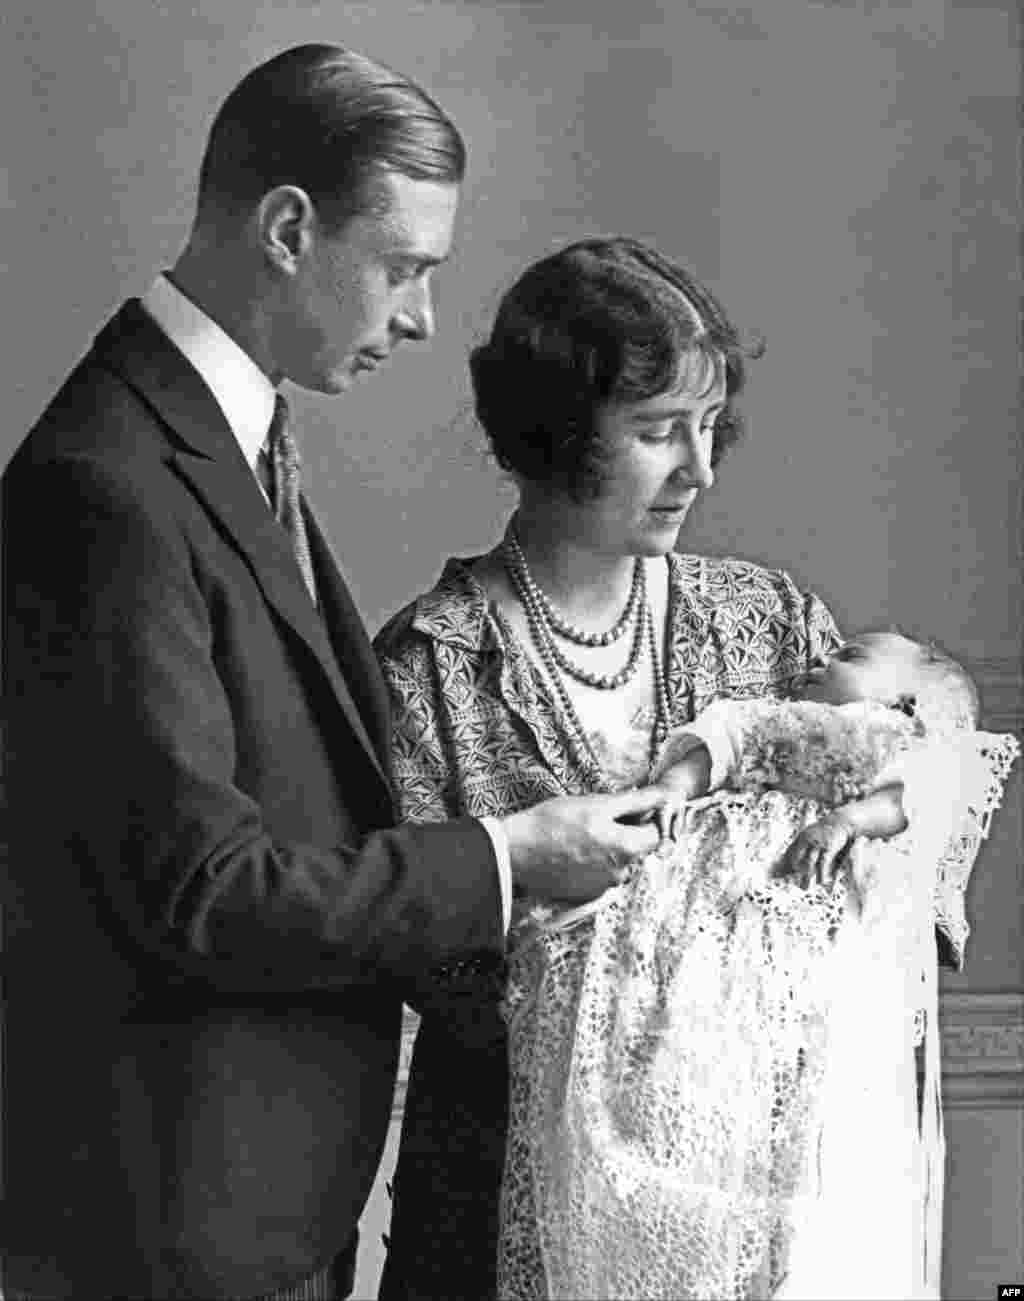 The Duchess of York, right, holds in 1926 in London her firstborn, Princess Elizabeth, under the loving gaze of her husband, the Duke of York and future King George VI. Elizabeth was born on April 21, 1926.